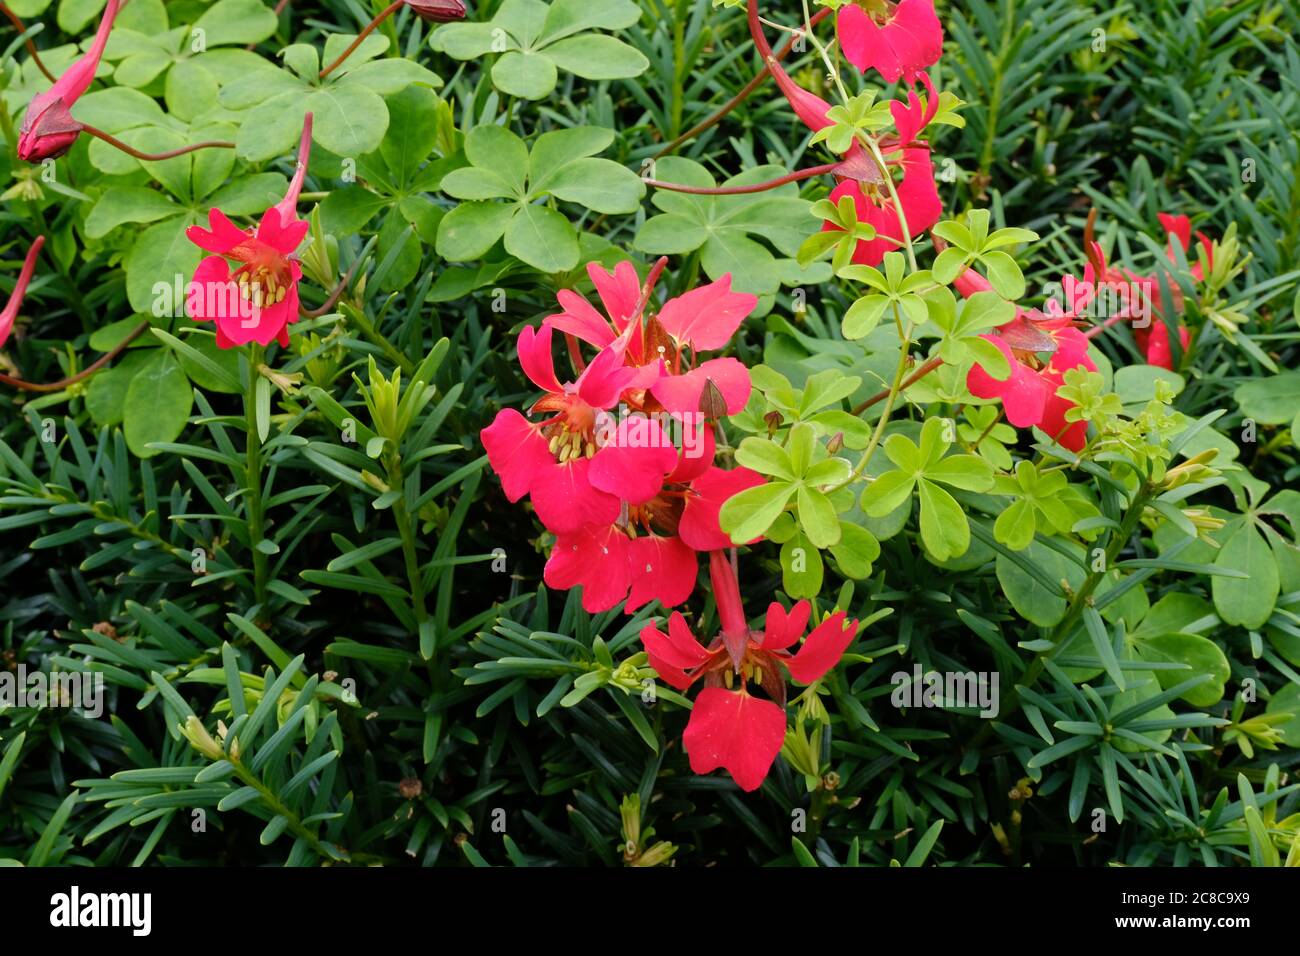 Scottish Flame Flower, Tropaeolum speciosum. Delightful, Scarlet Flower, Turquoise-Blue, Berries, Divided Leaves, Cumbria, England, Northern Climate. Stock Photo